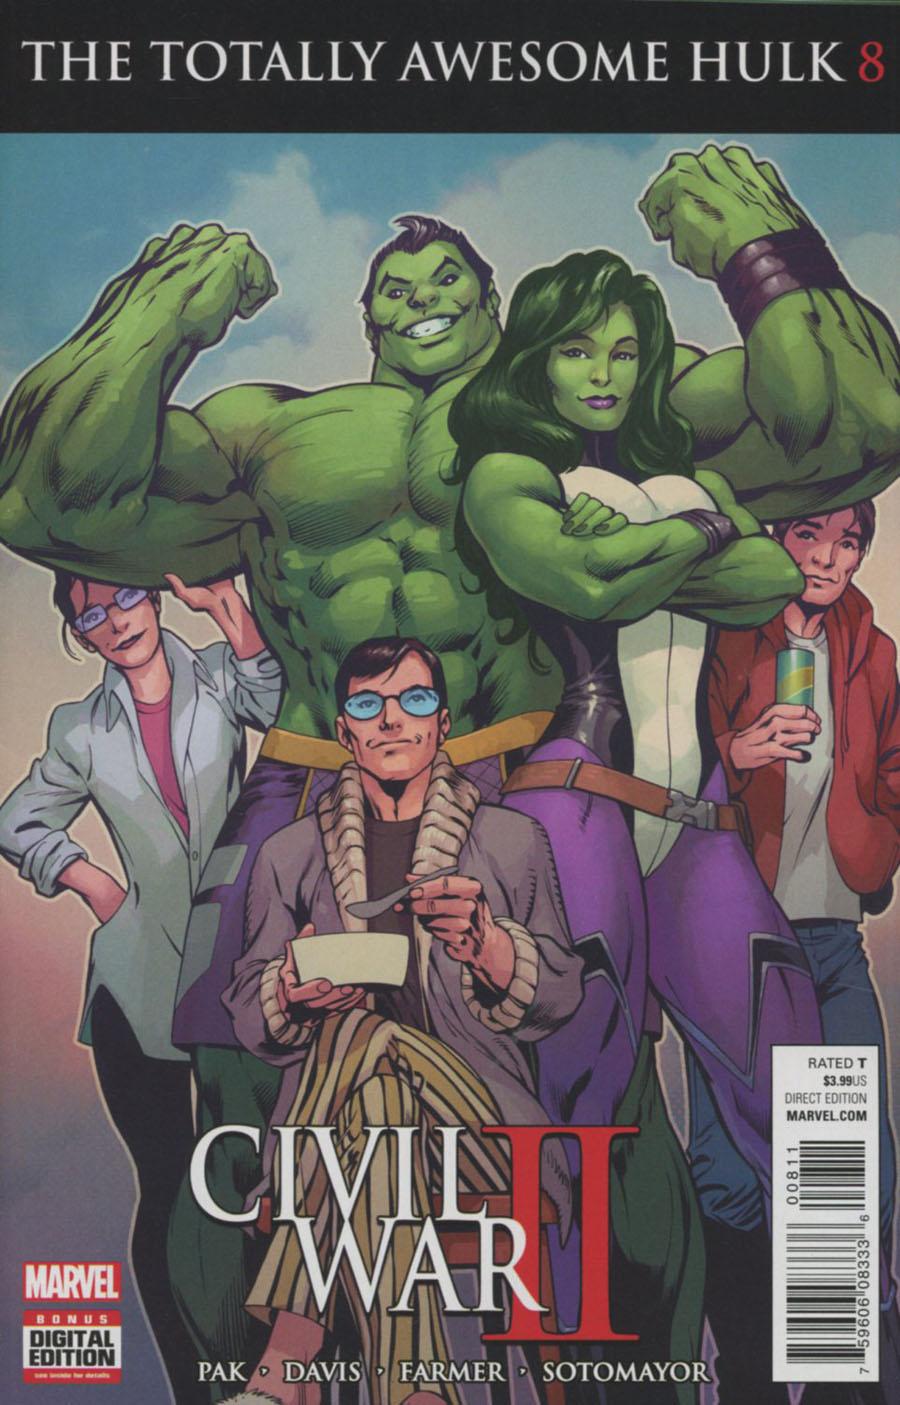 Totally Awesome Hulk Vol. 1 #8